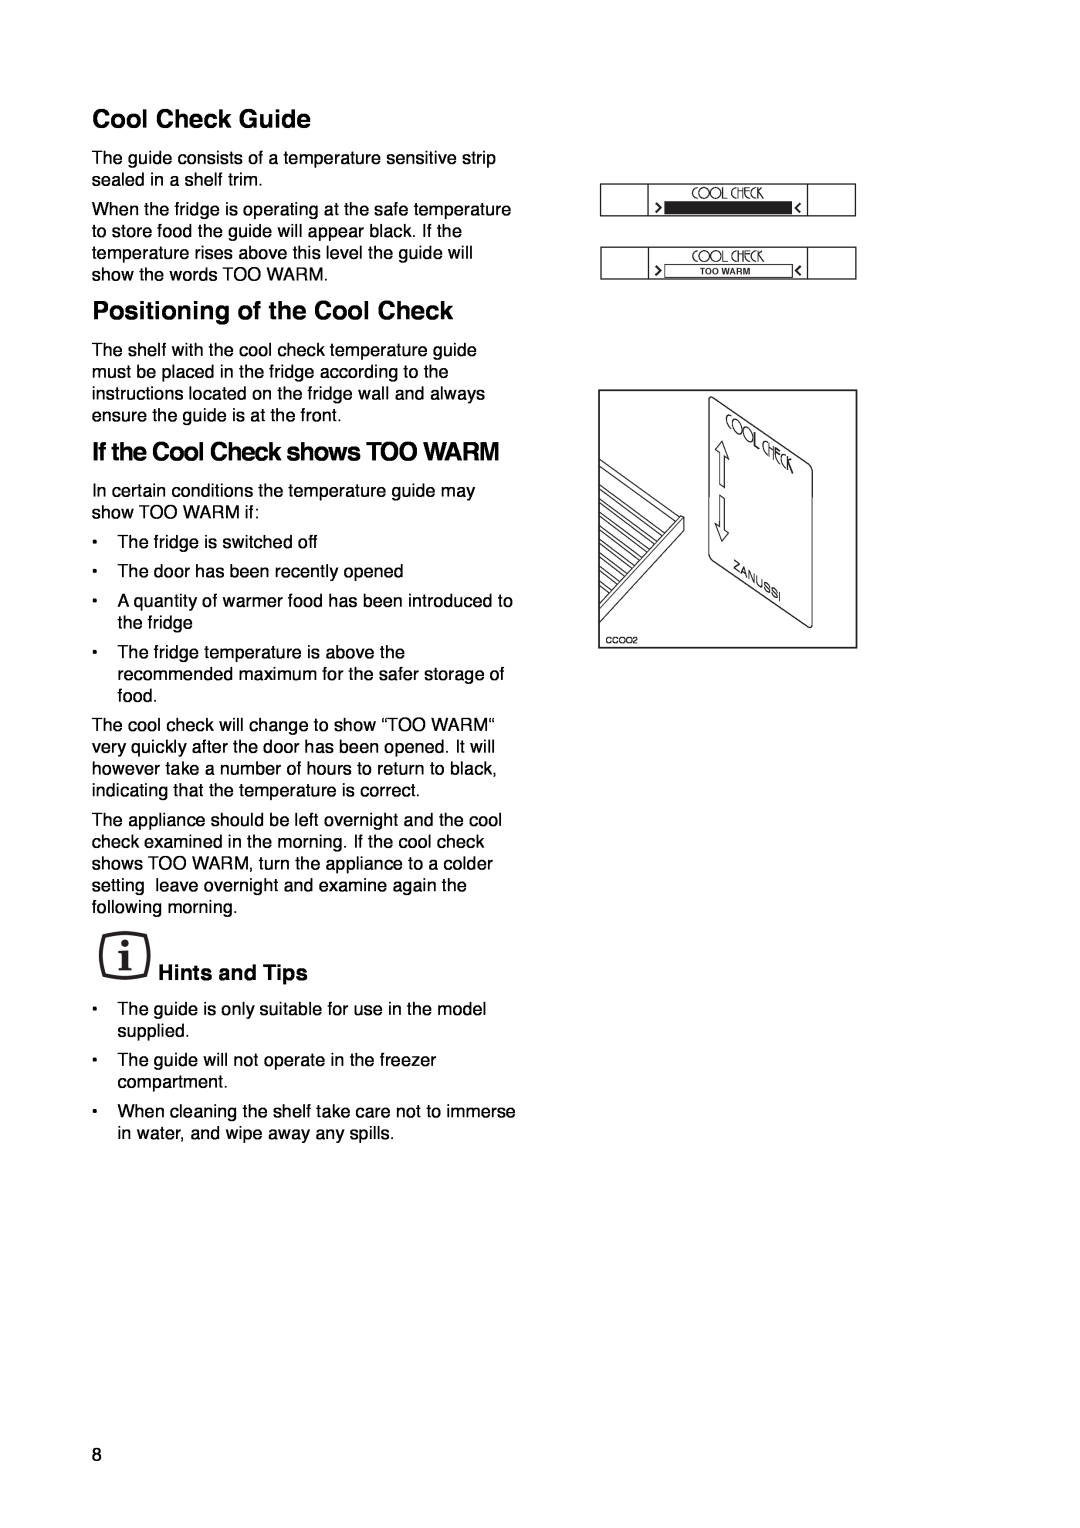 Zanussi ZI 7243 manual Cool Check Guide, Positioning of the Cool Check, If the Cool Check shows TOO WARM, Hints and Tips 